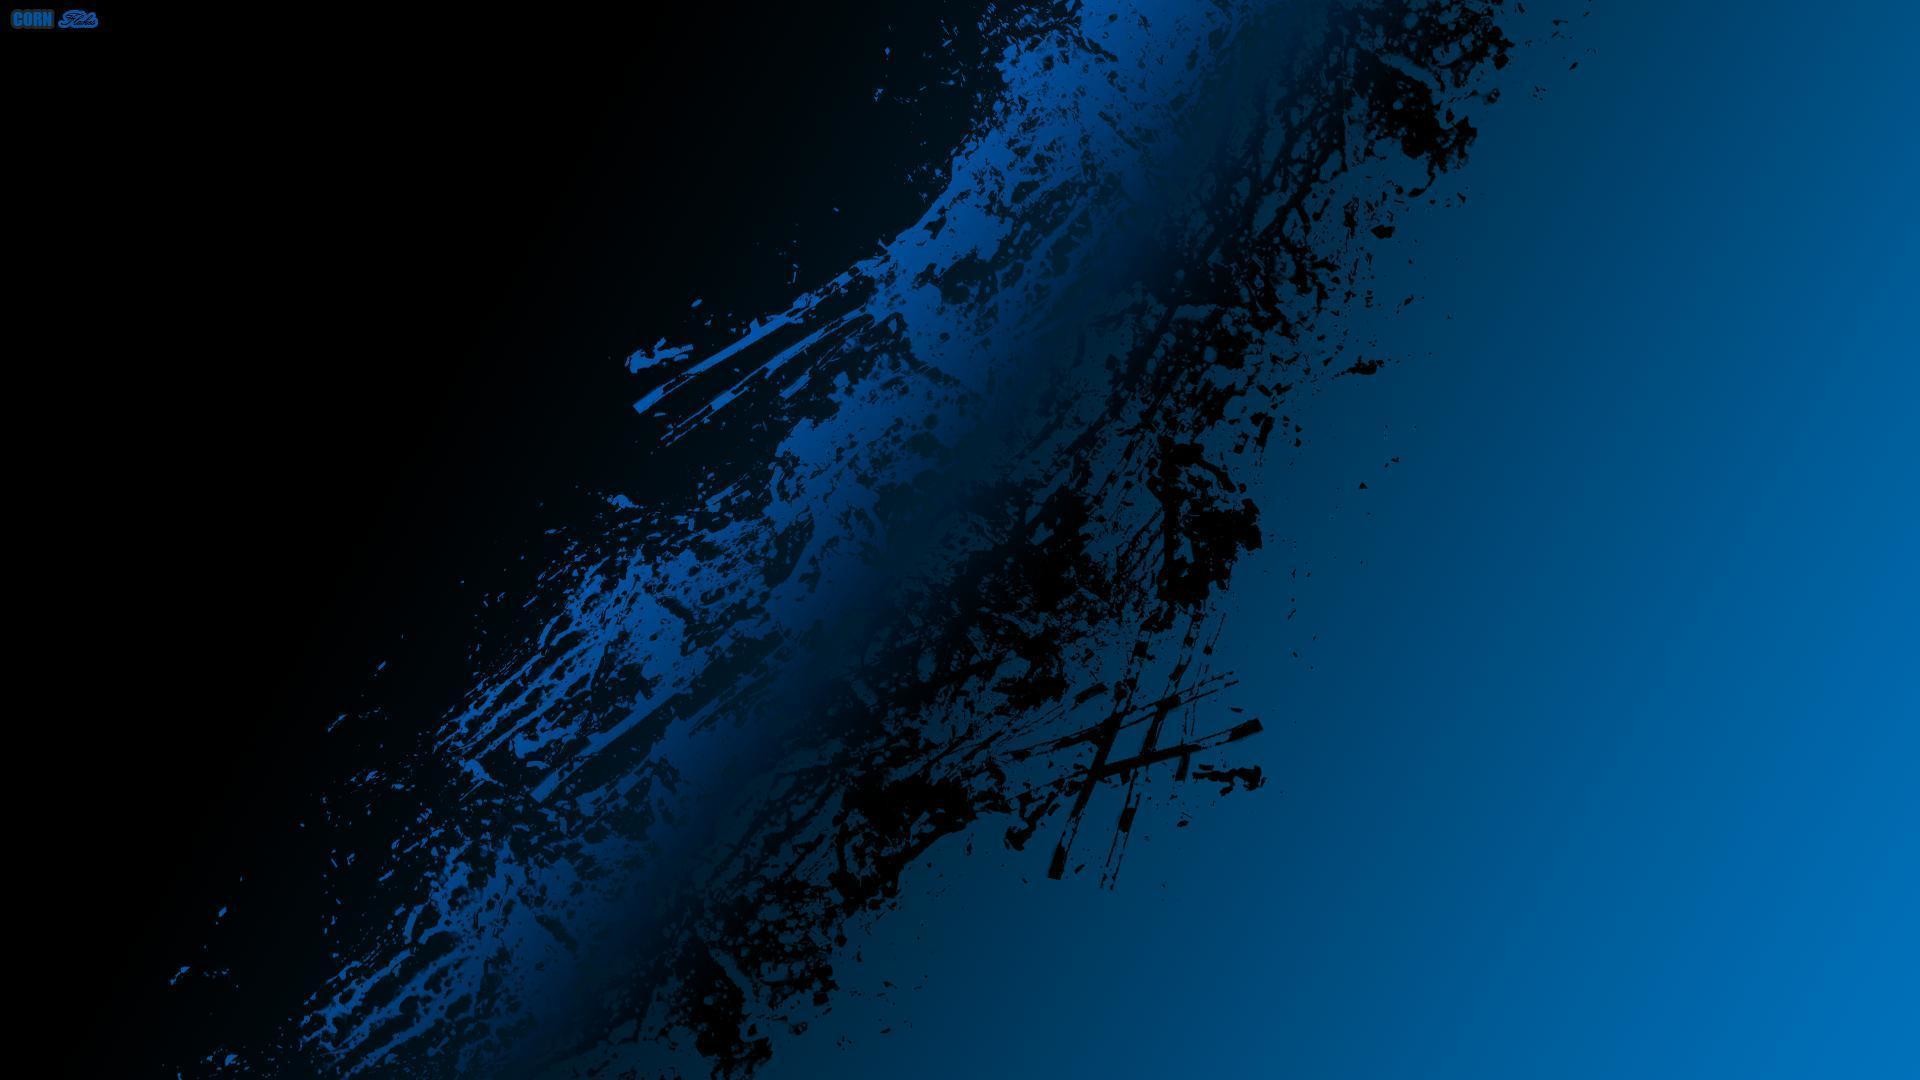 Black Blue Abstract Wallpaper Hq Pictures 13 HD Wallpapers | lzamgs.